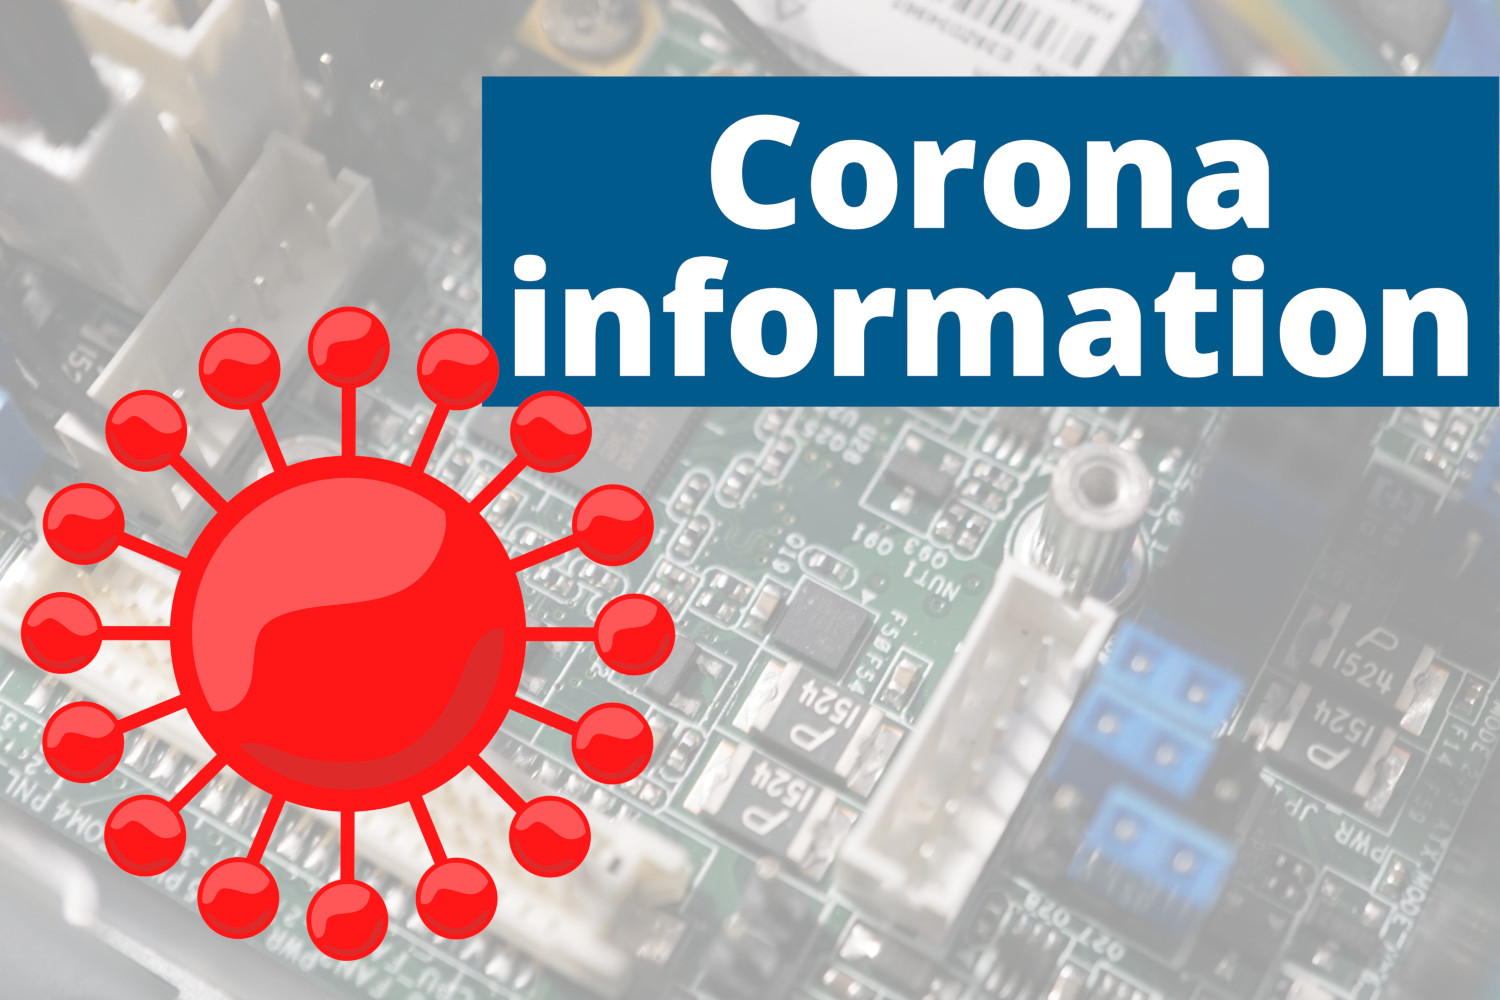 Corona virus: delivery is still possible